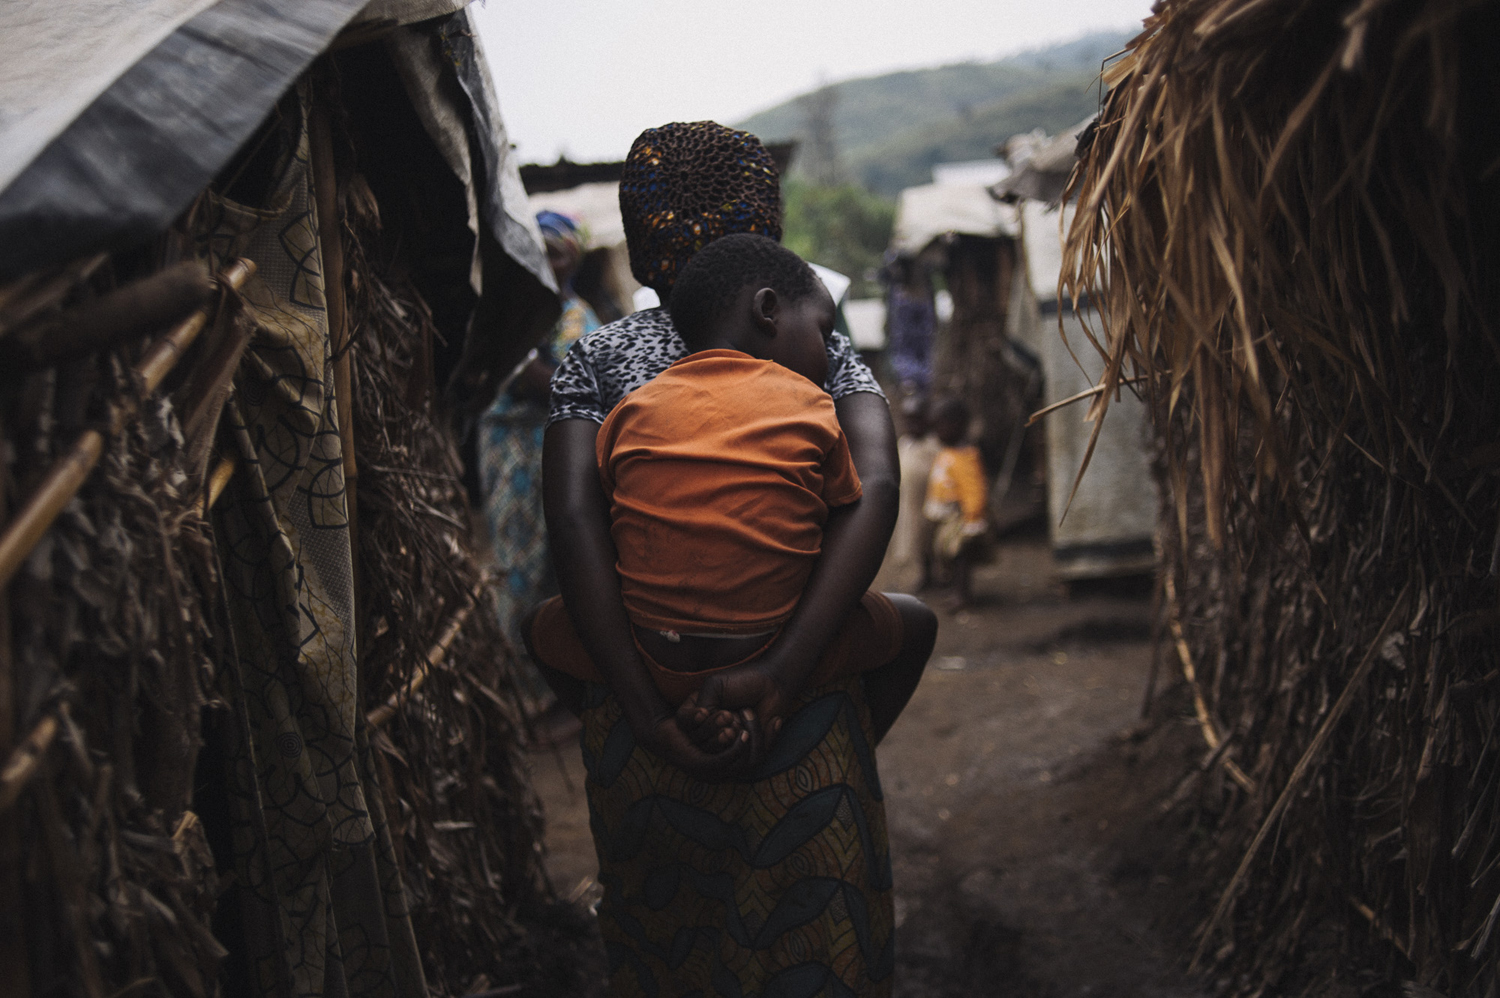 Fifi Bahati (33), a displaced Congolese lady, carries her child through the Birere I displacement camp in the town of Nyabiondo. "It was war that made me leave Kinyumba to come here" says Fifi, a mother of four. "We want to go home, but until peace is reestablished, we can't go back.", July 21, 2014.